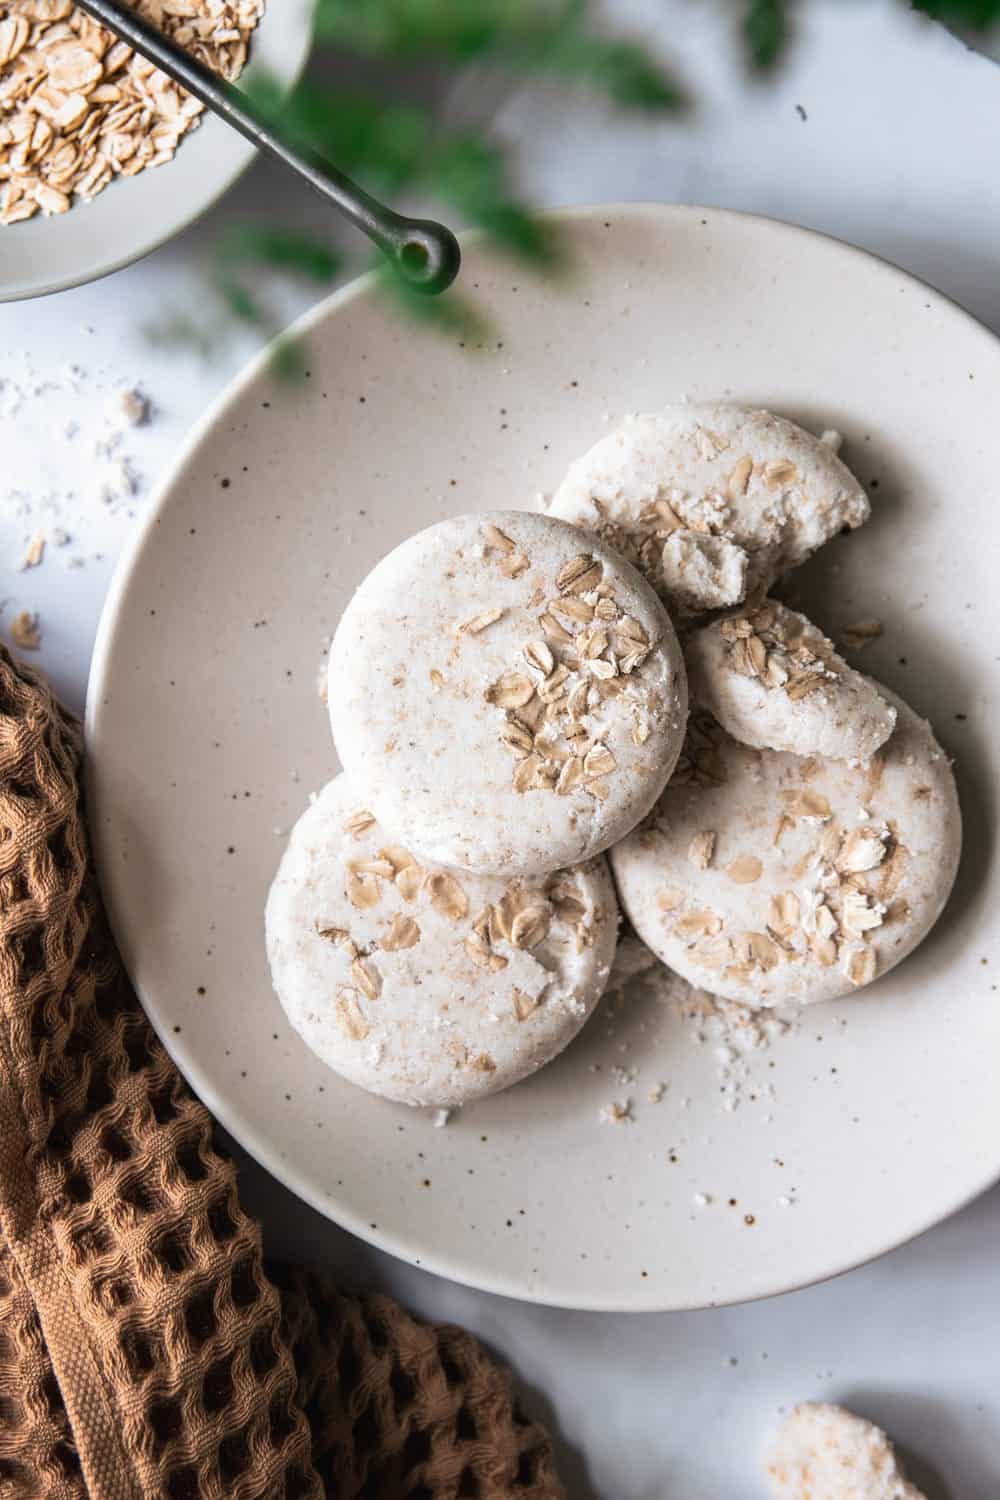 How to make oatmeal bath bombs for itchy skin